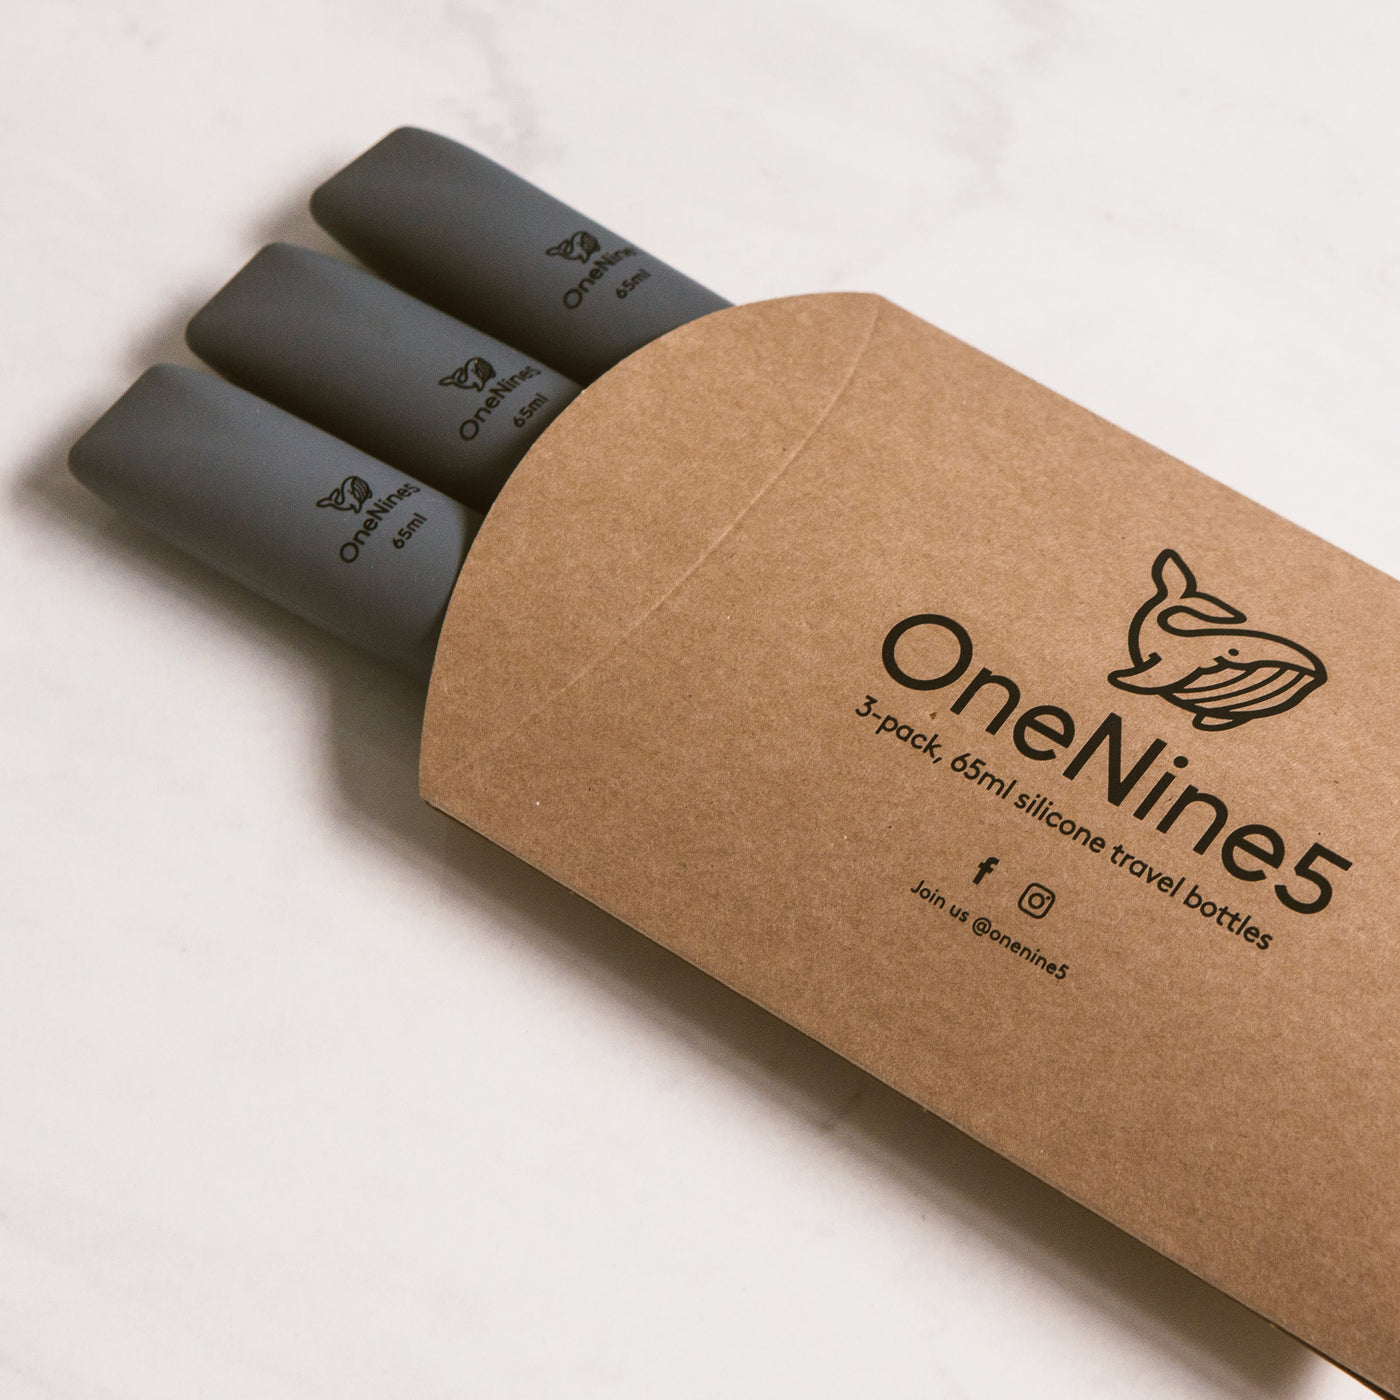 3 pack of grey silicone travel bottles are packed inside brown, recyclable kraft paper. The packaging is branded with a black OneNine5 logo 